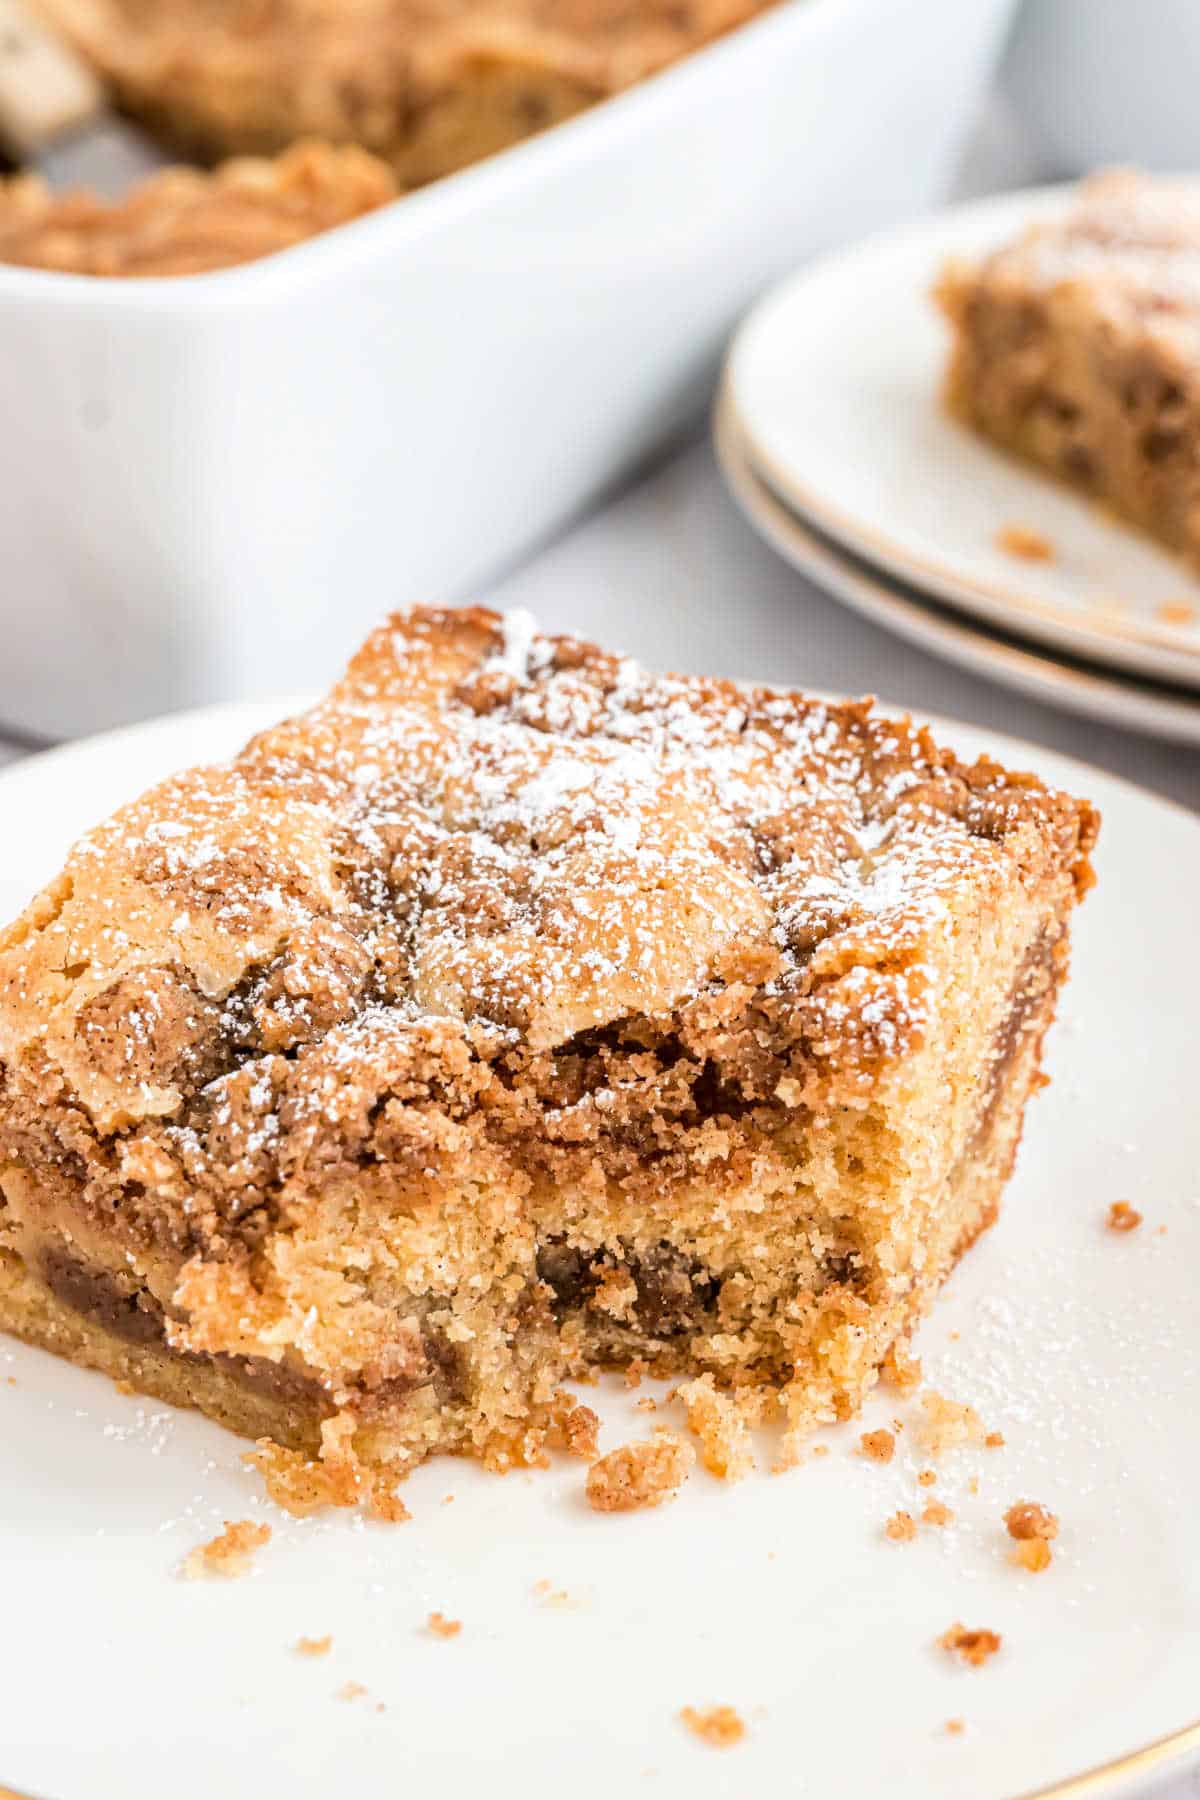 Slice of cinnamon coffee cake with a bite taken out.